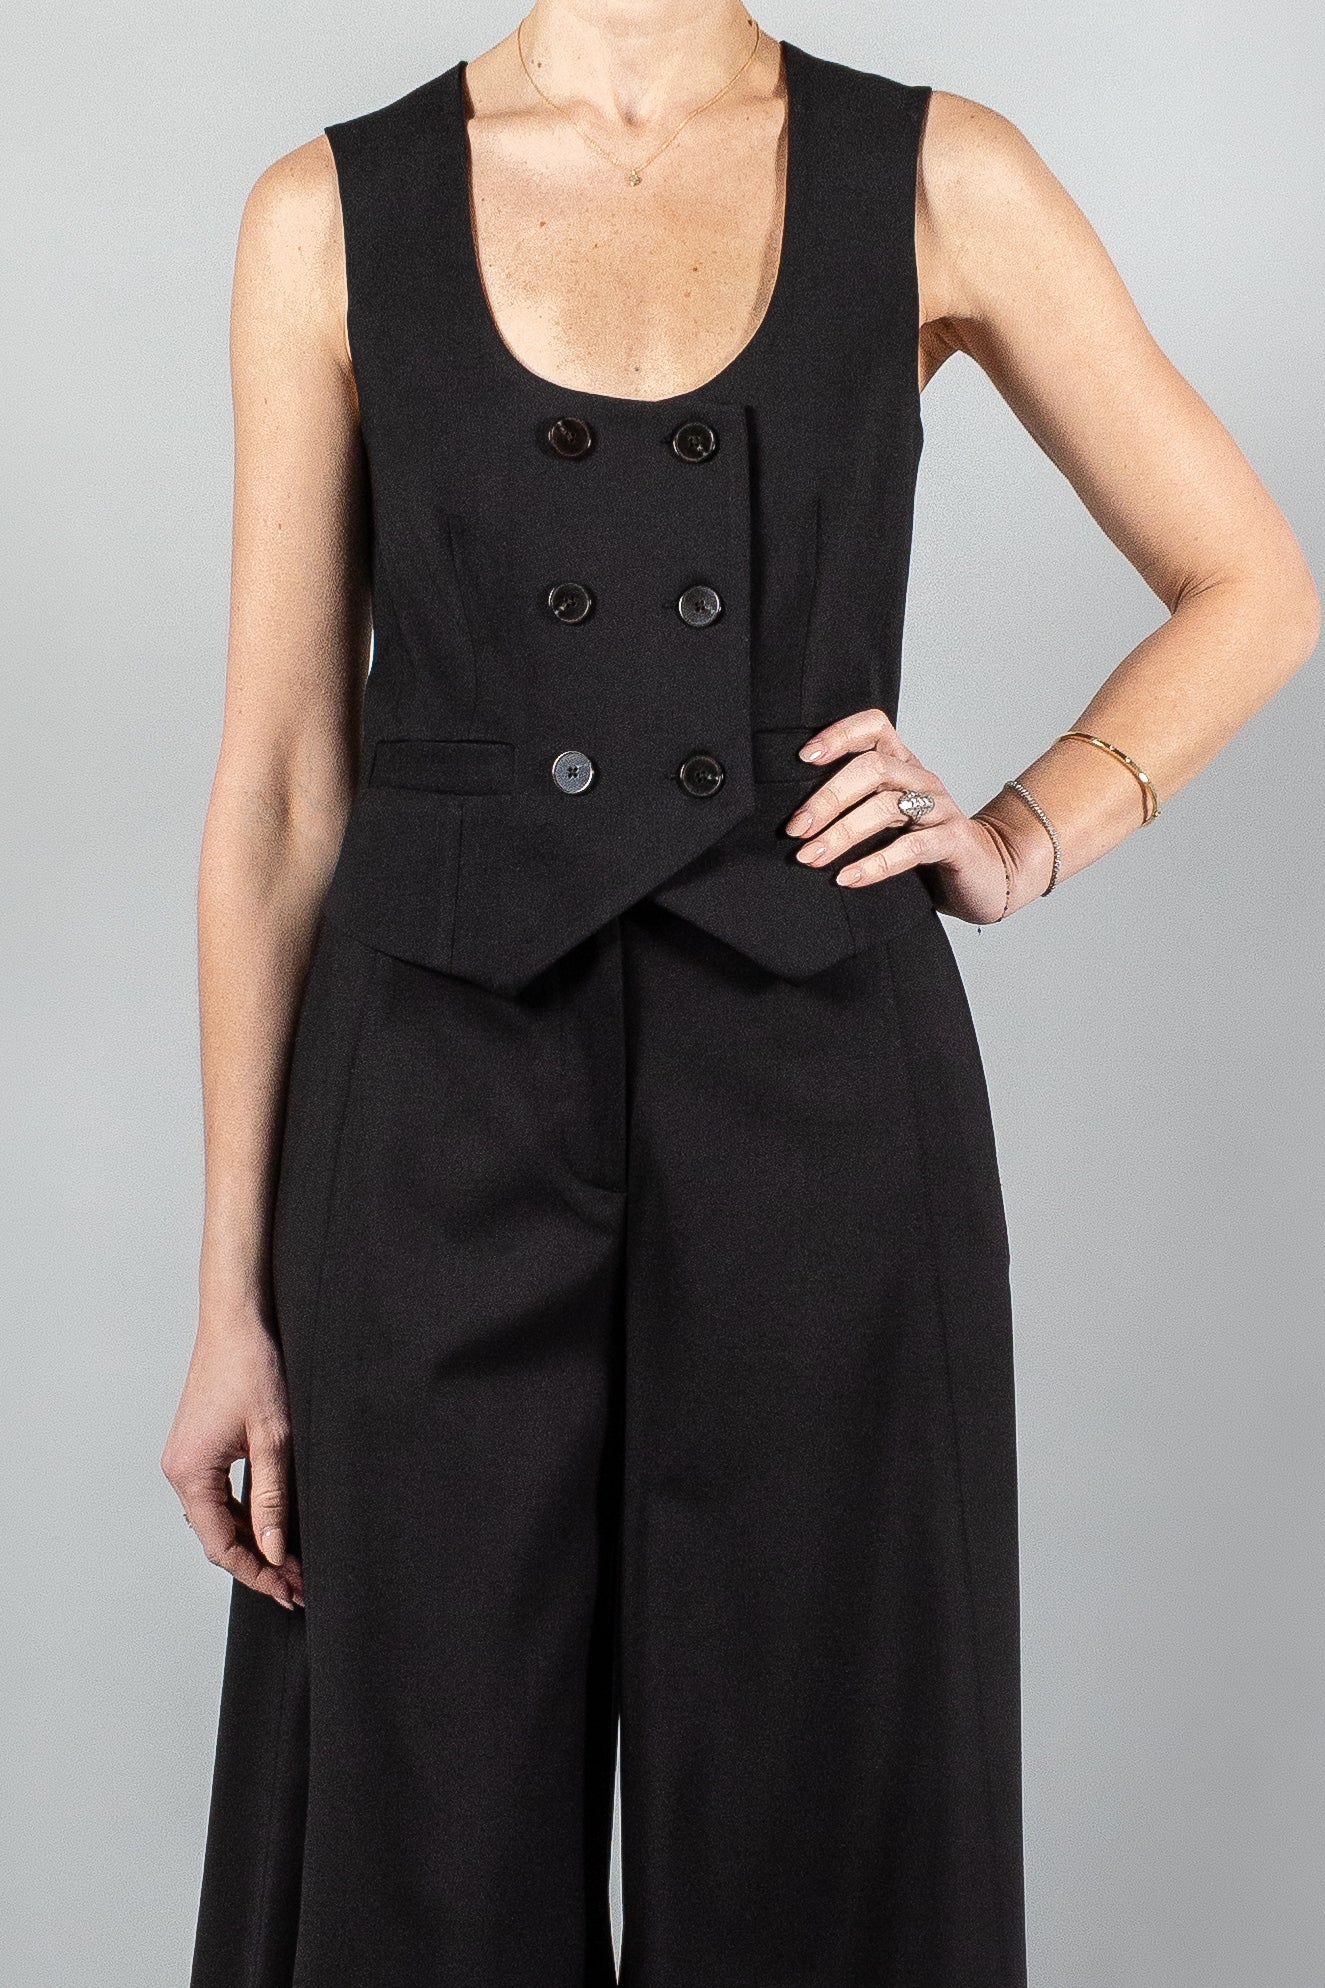 Heirlome Ines Waistcoat-Jackets and Blazers-Misch-Boutique-Vancouver-Canada-misch.ca